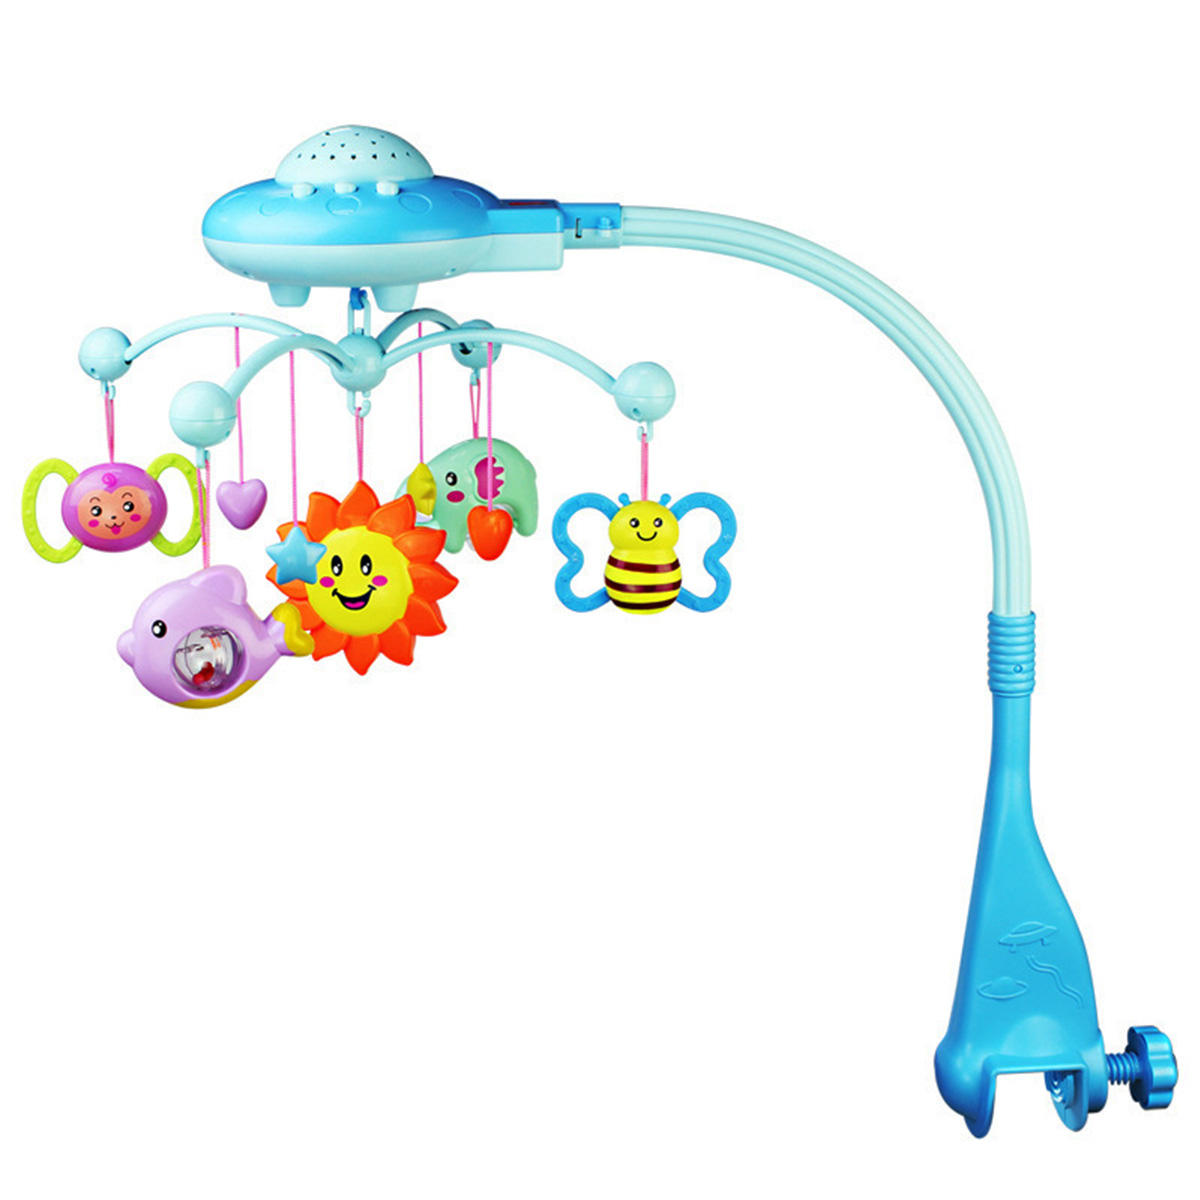 Crib-Mobile-Musical-Bed-Bell-With-Animal-Rattles-Projection-Early-Learning-Toys-0-12-Months-1434065-10